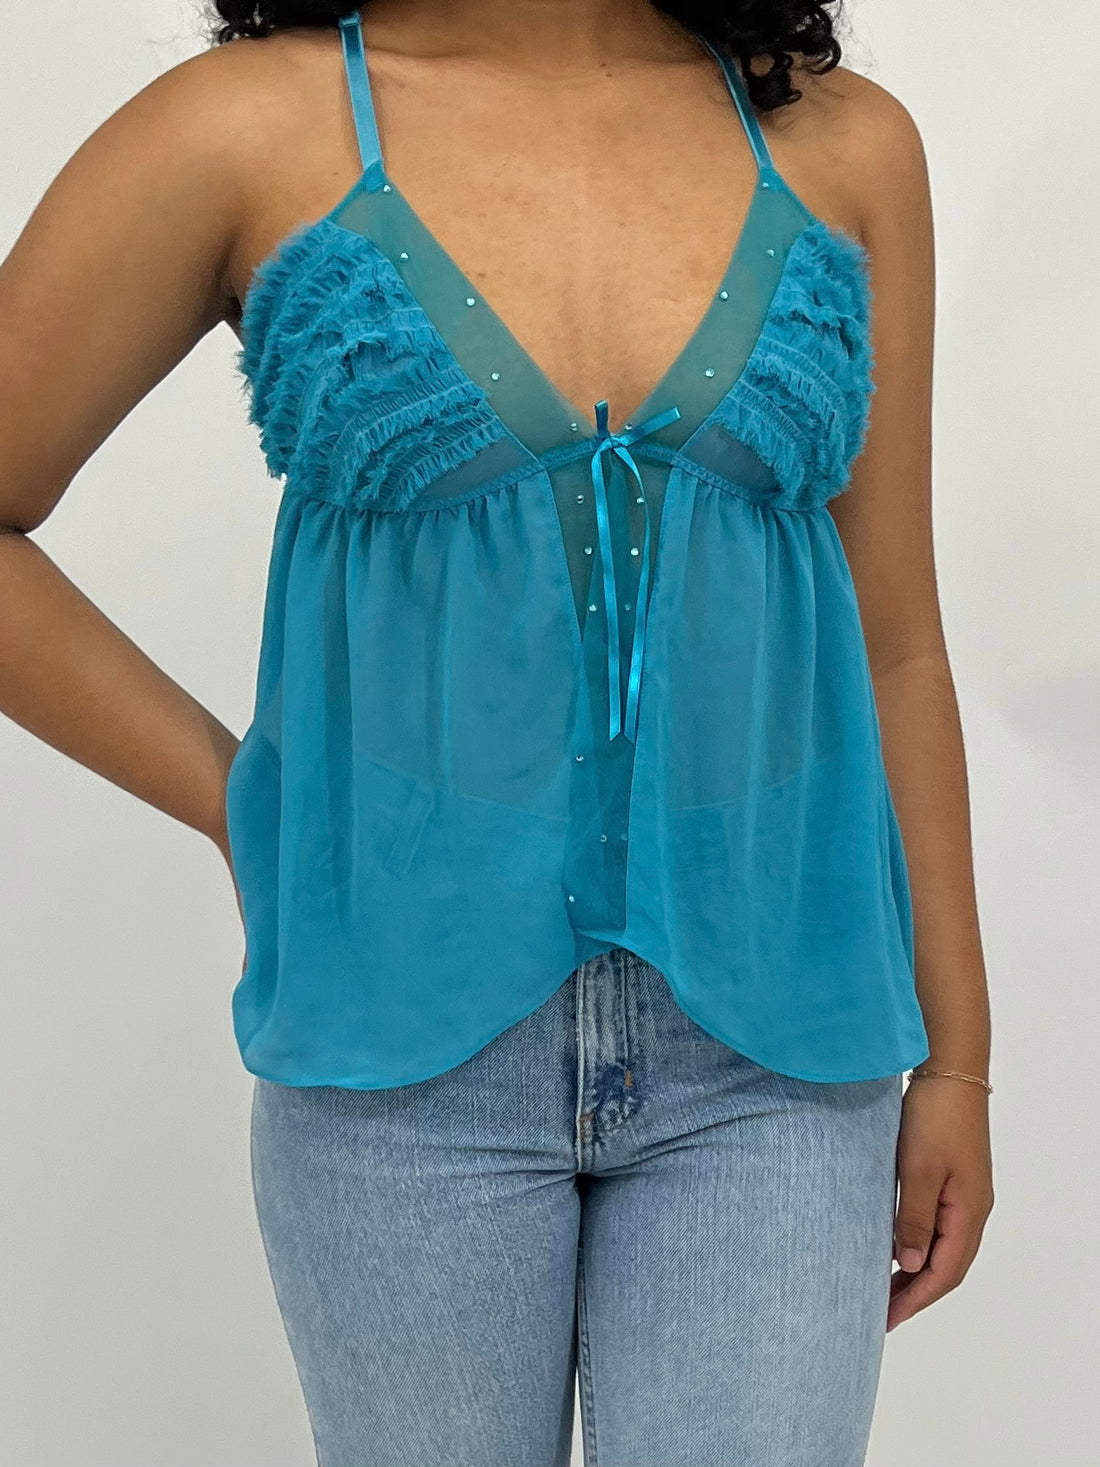 Ruffle Bedazzled Cami Tank (S-L)